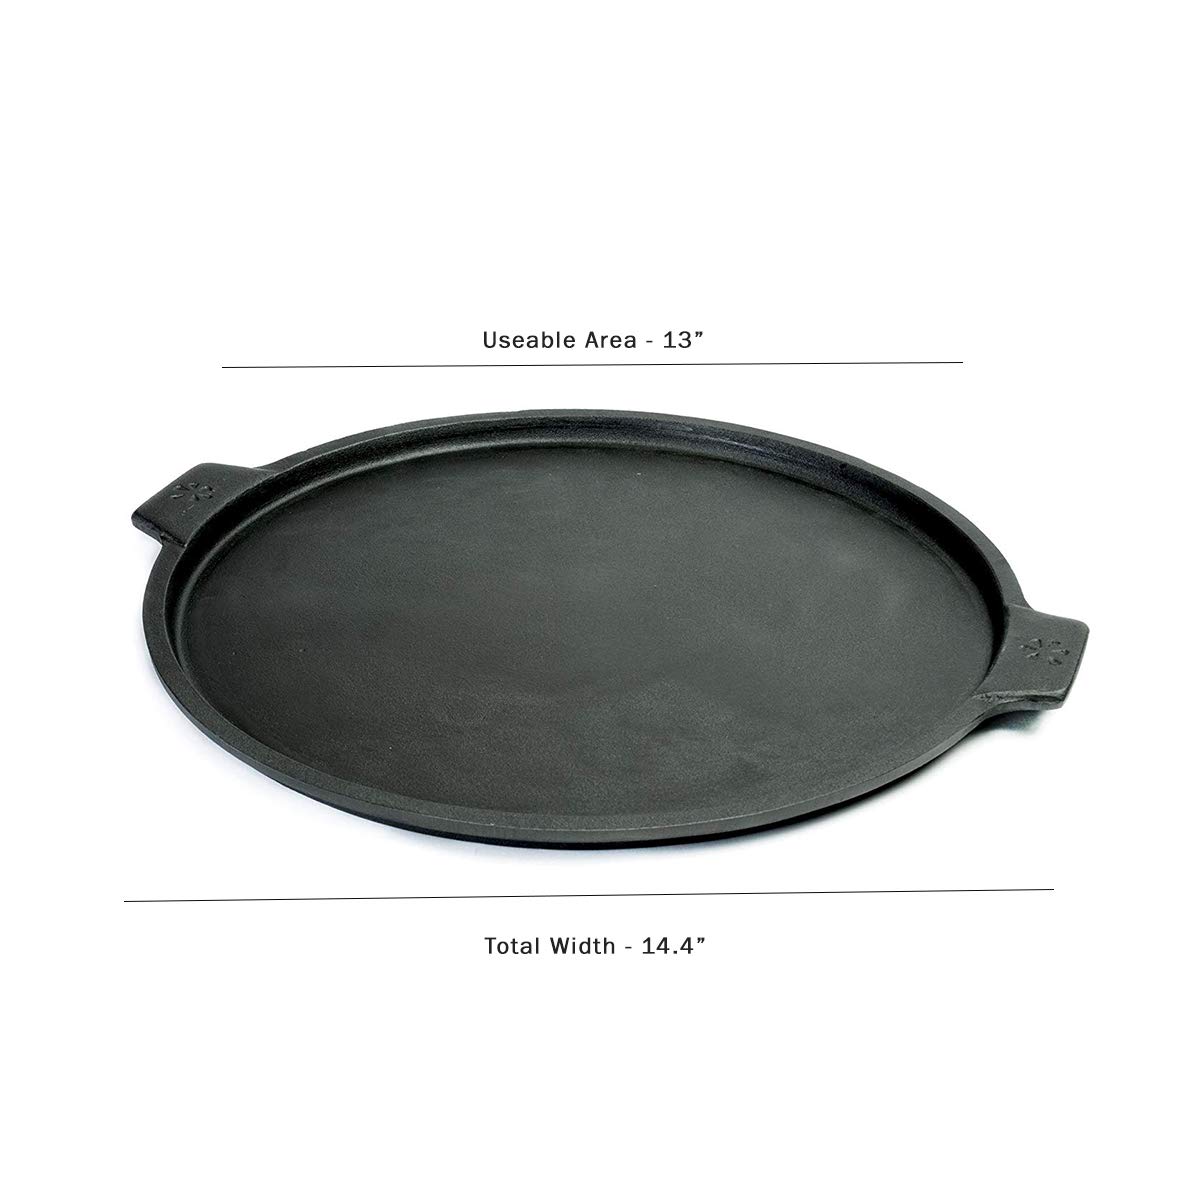 Pizzacraft Cast Iron Pizza Pan, 14-Inch, For Oven or Grill -